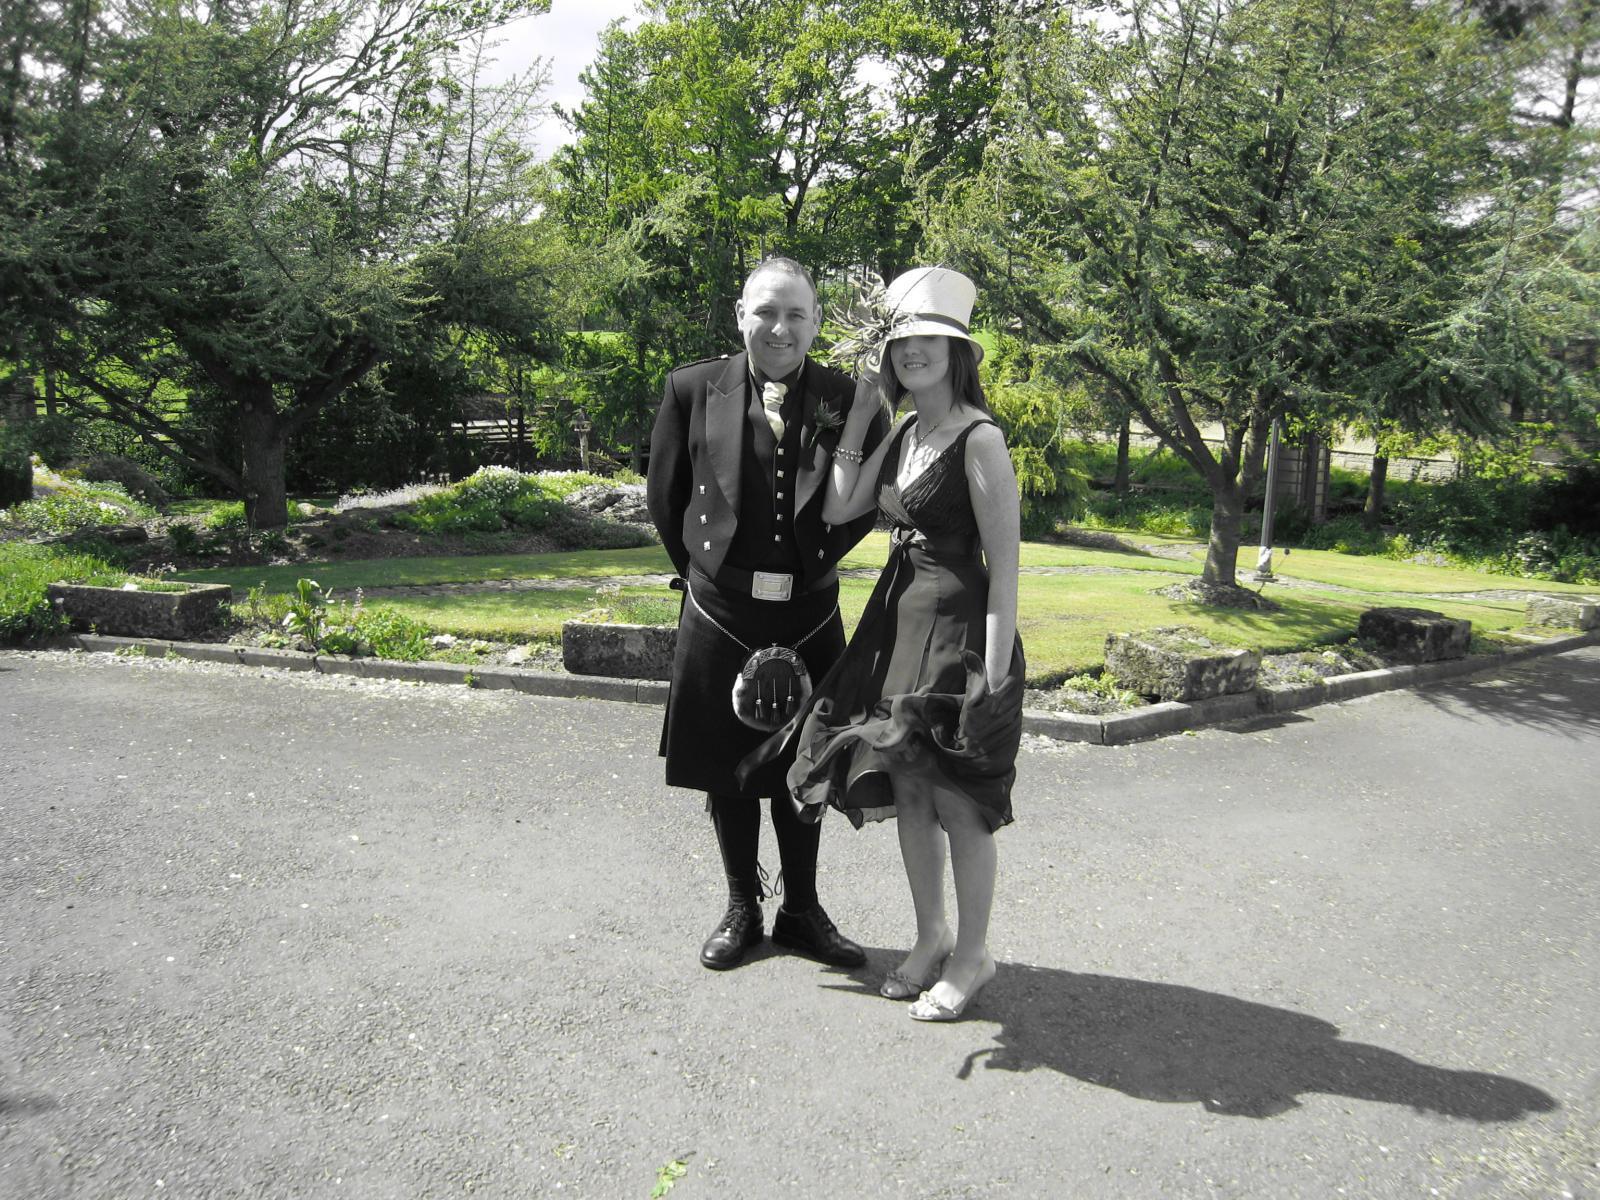 Me and Hubby going to a Scottish Wedding